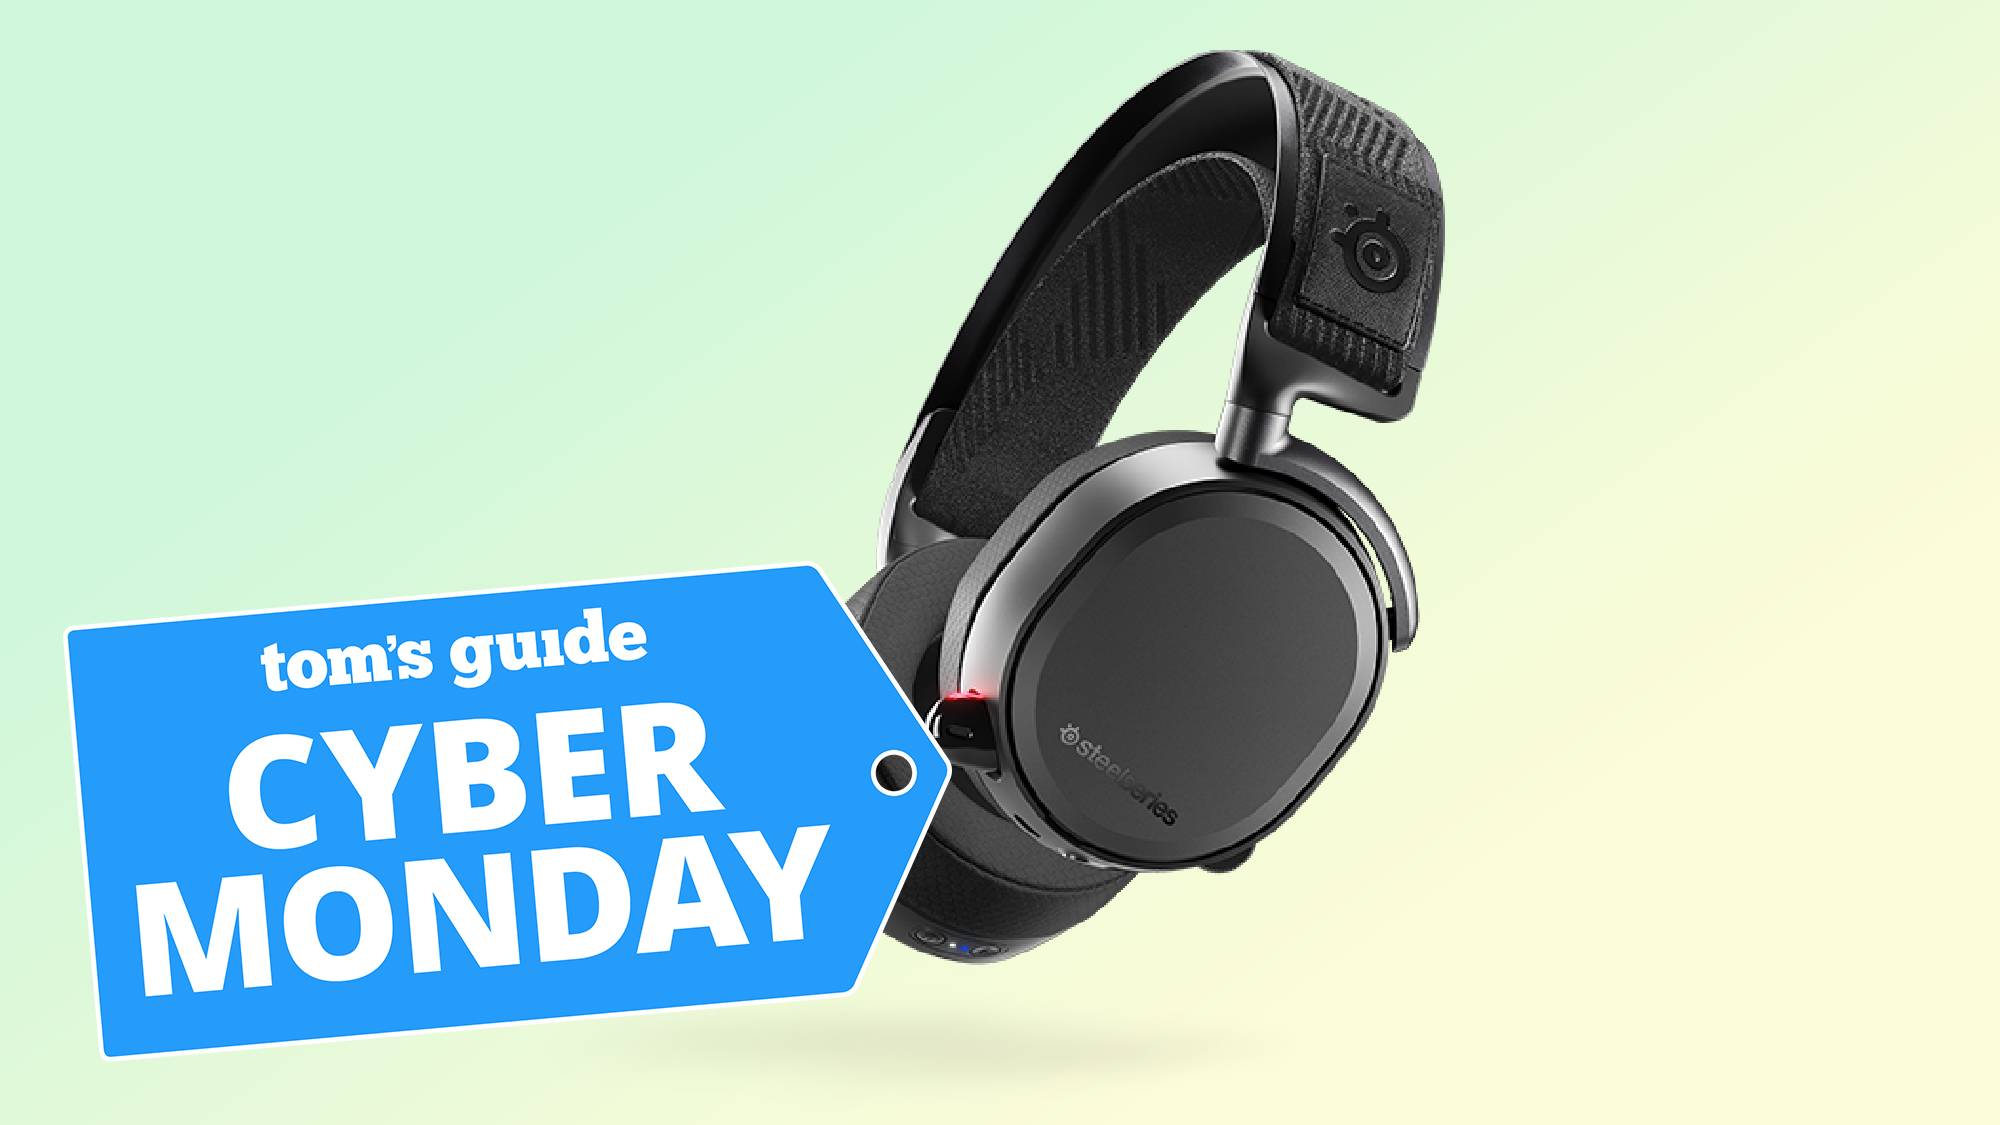 SteelSeries Arctis 7 with a Cyber Monday deal tag